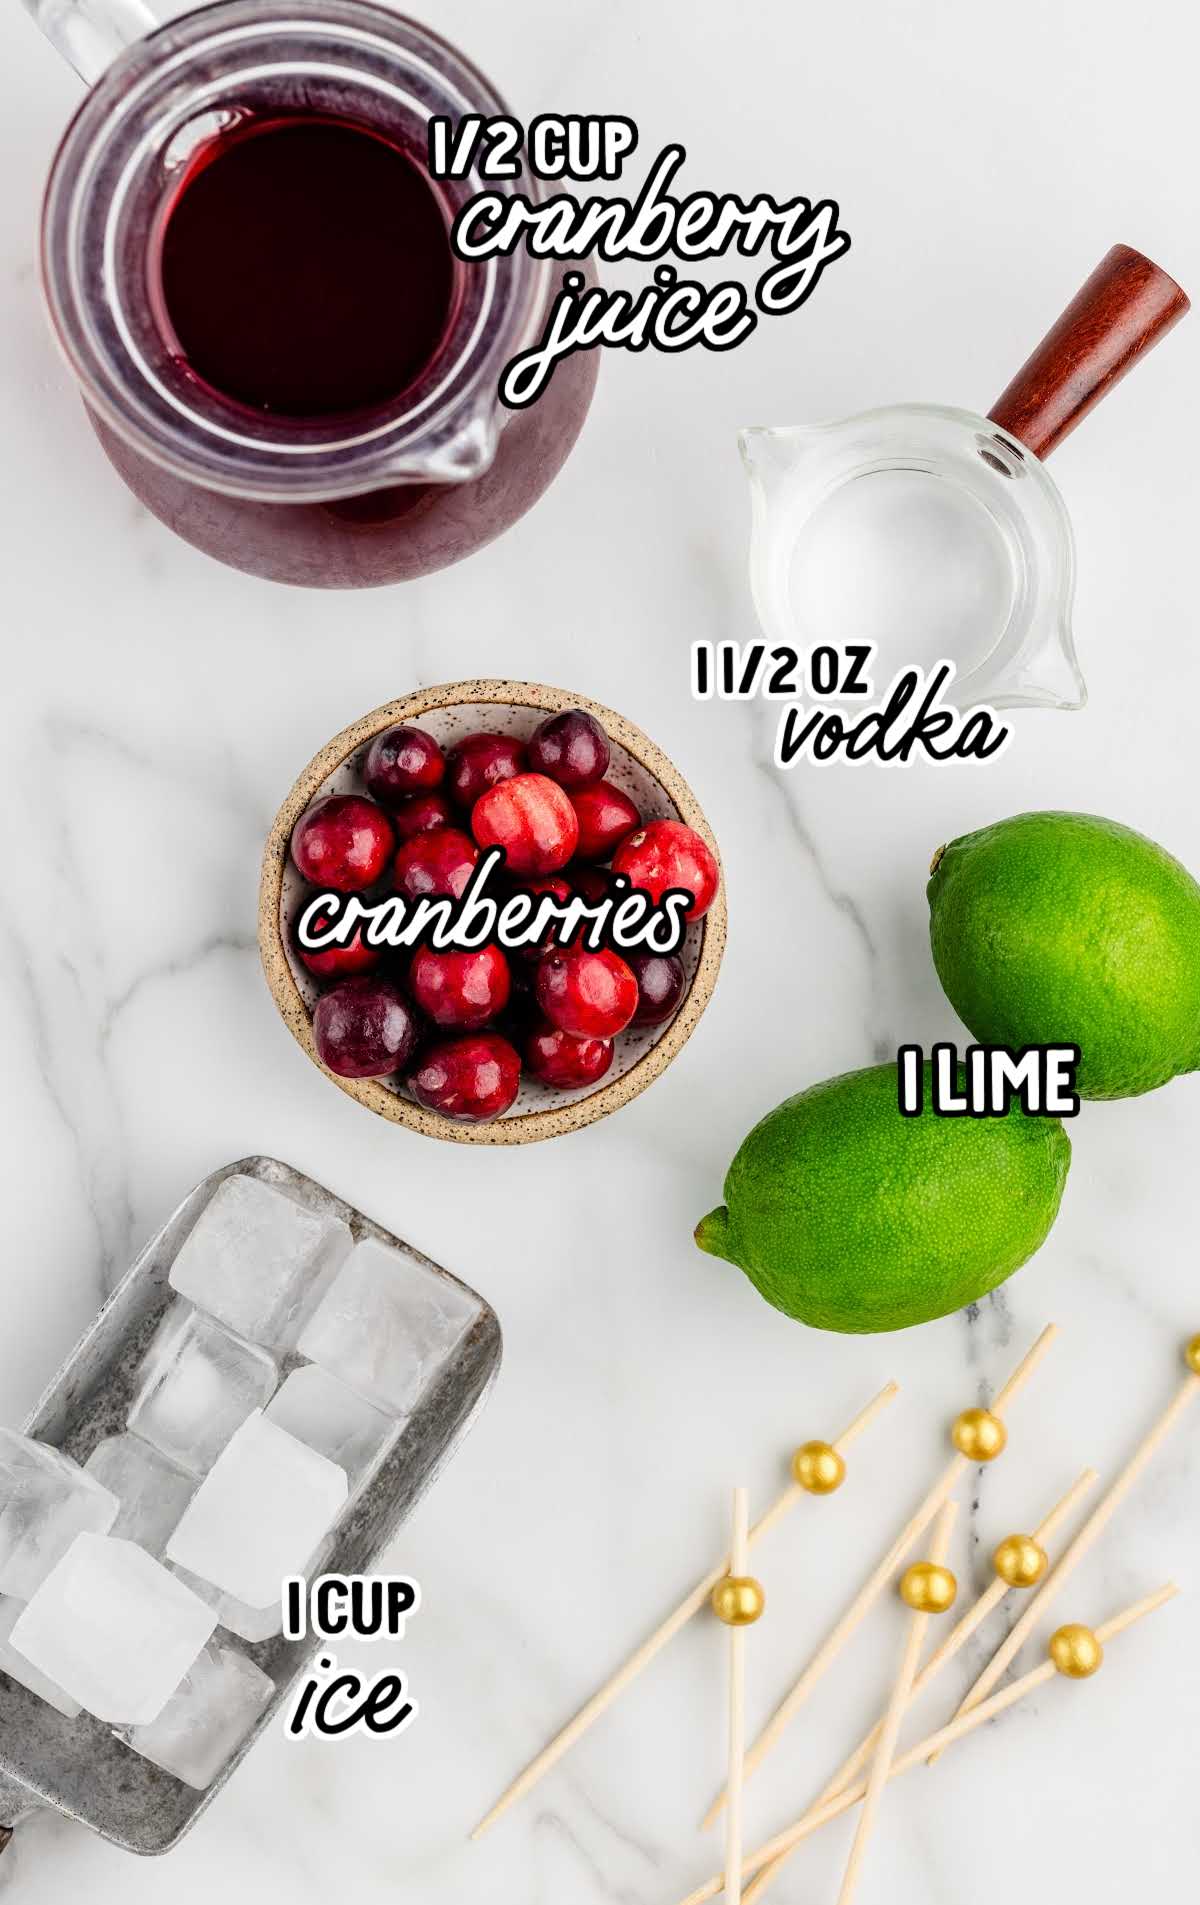 Vodka Cranberry raw ingredients that are labeled